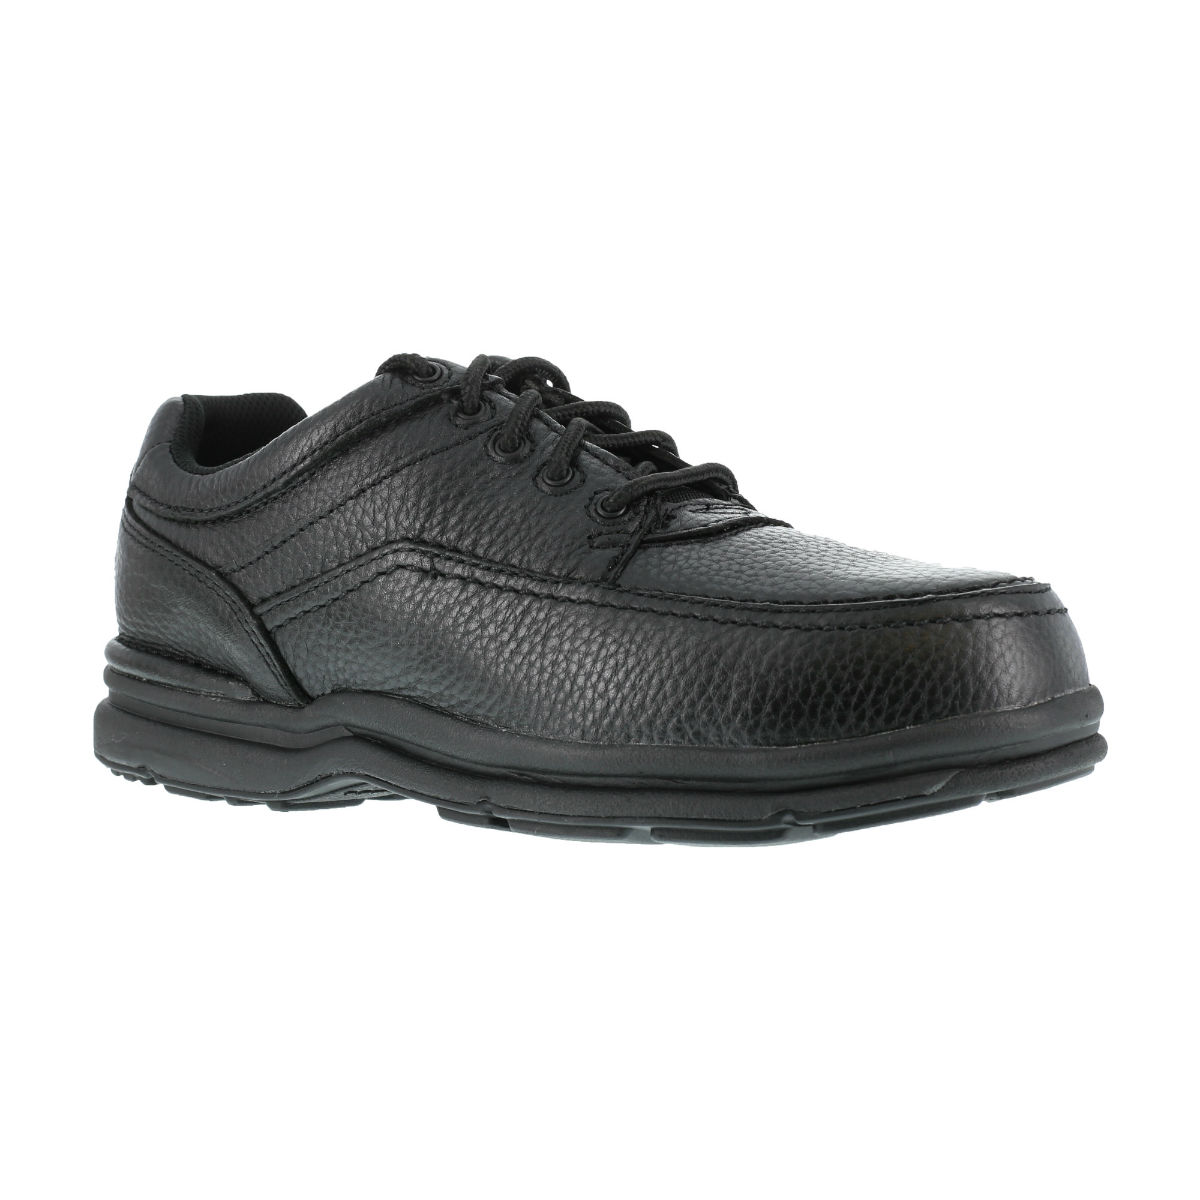 Rockport Works Men's World Tour Steel Toe Esd Shoes, Extra Wide